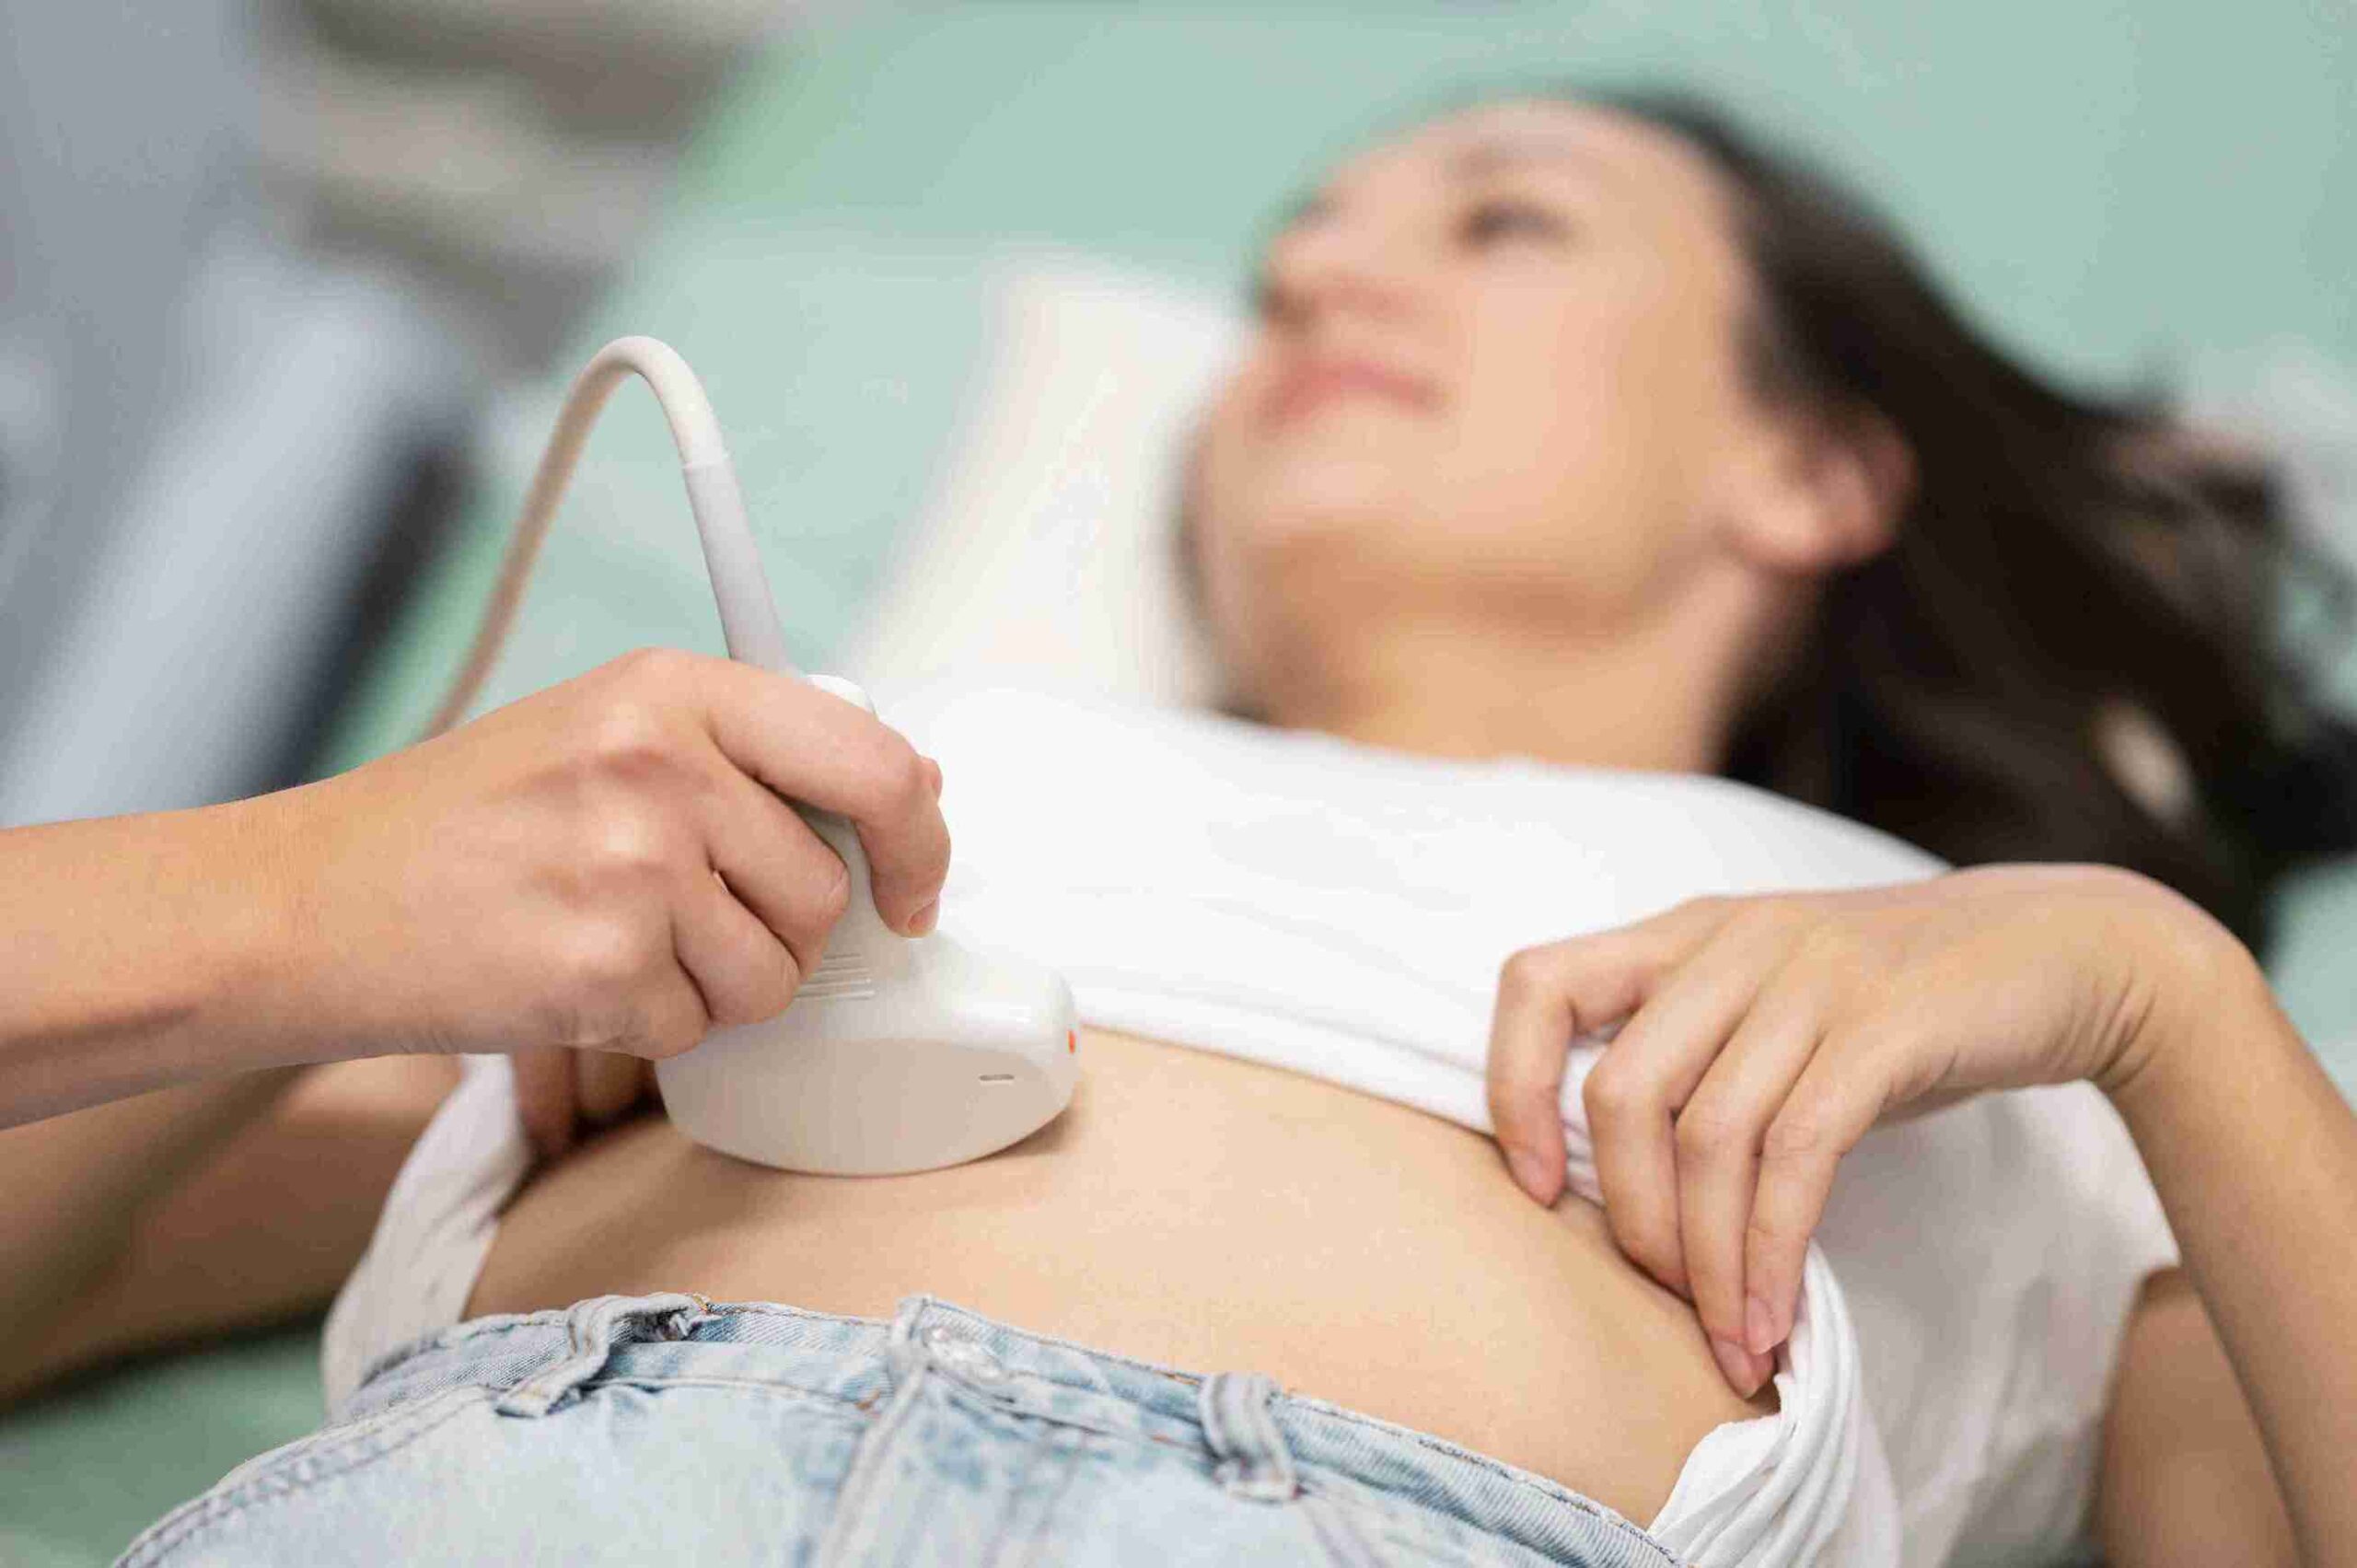 How Doppler Ultrasound is Used in Monitoring Fetal Health During Pregnancy